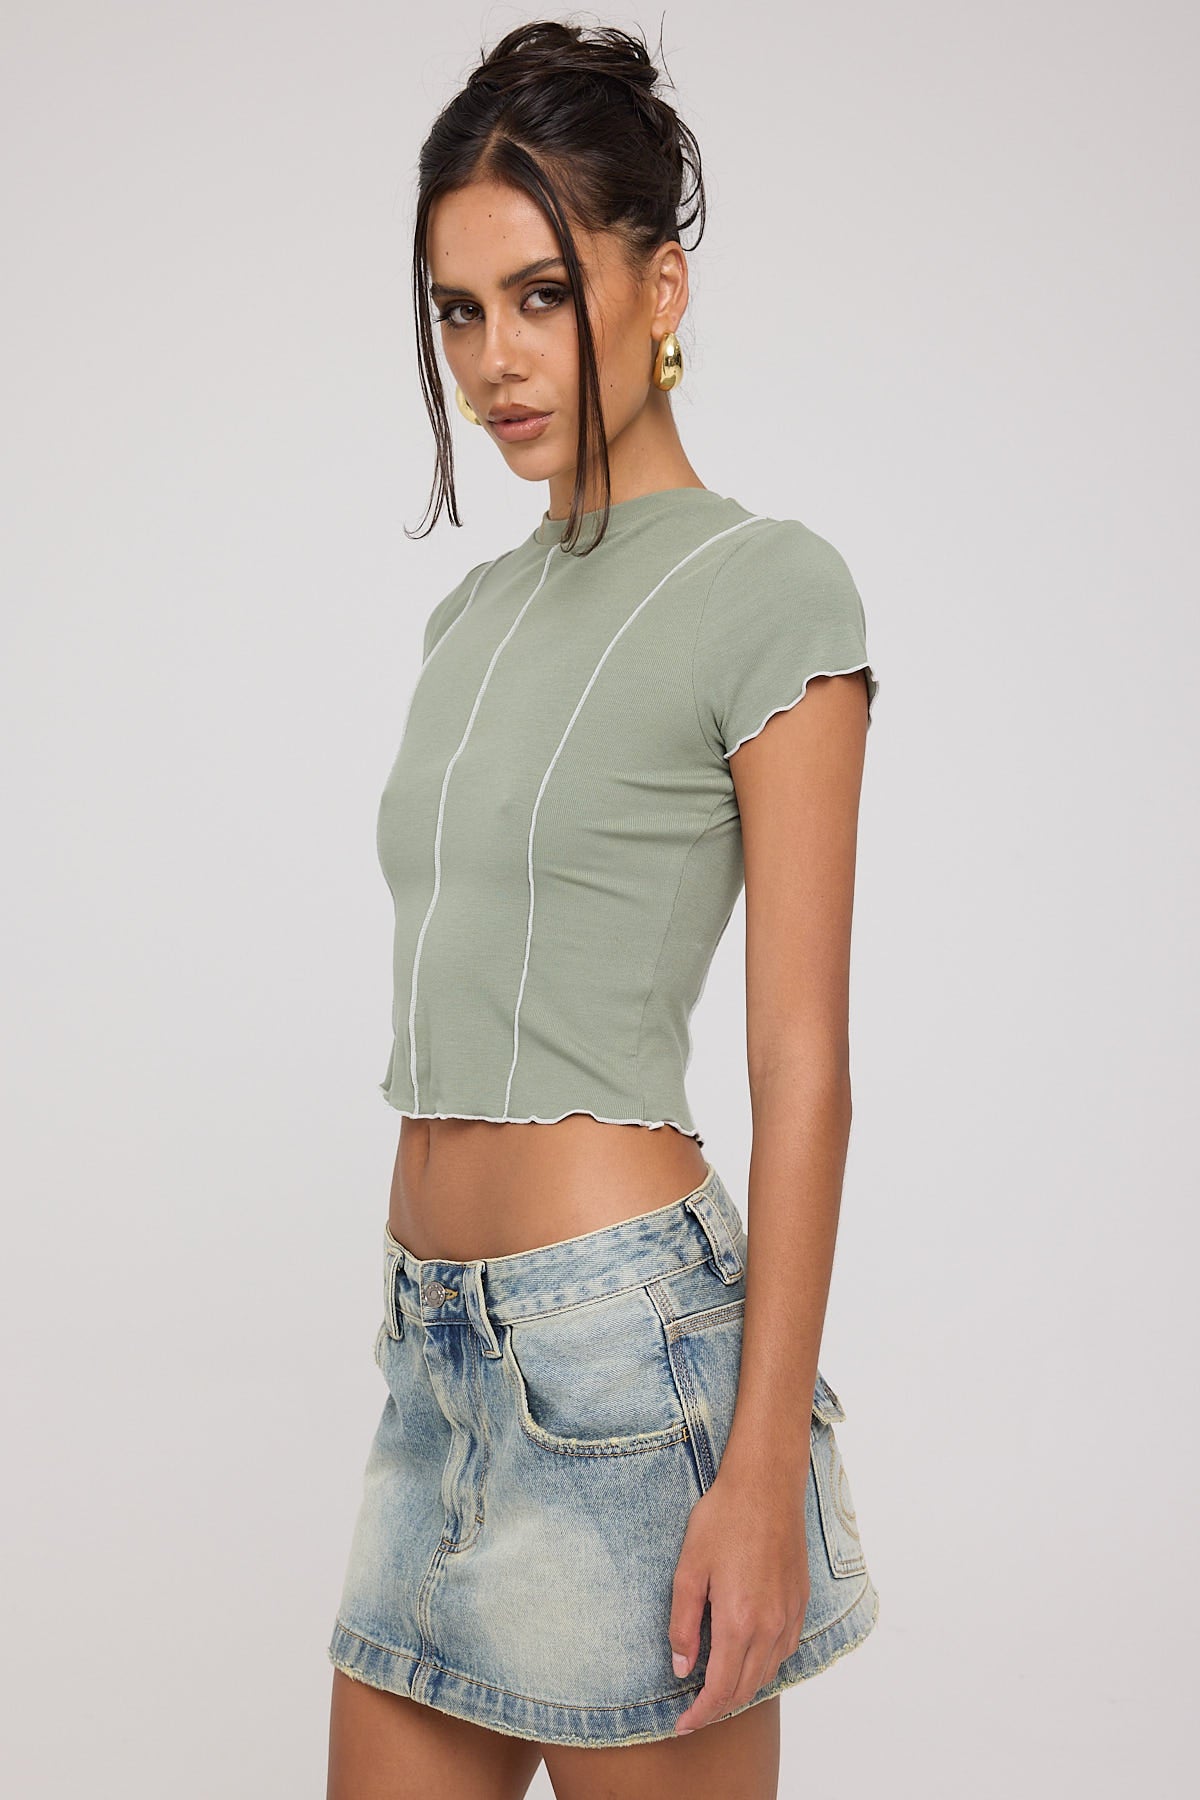 Luck & Trouble Contrast Exposed Seam Baby Tee Khaki Green